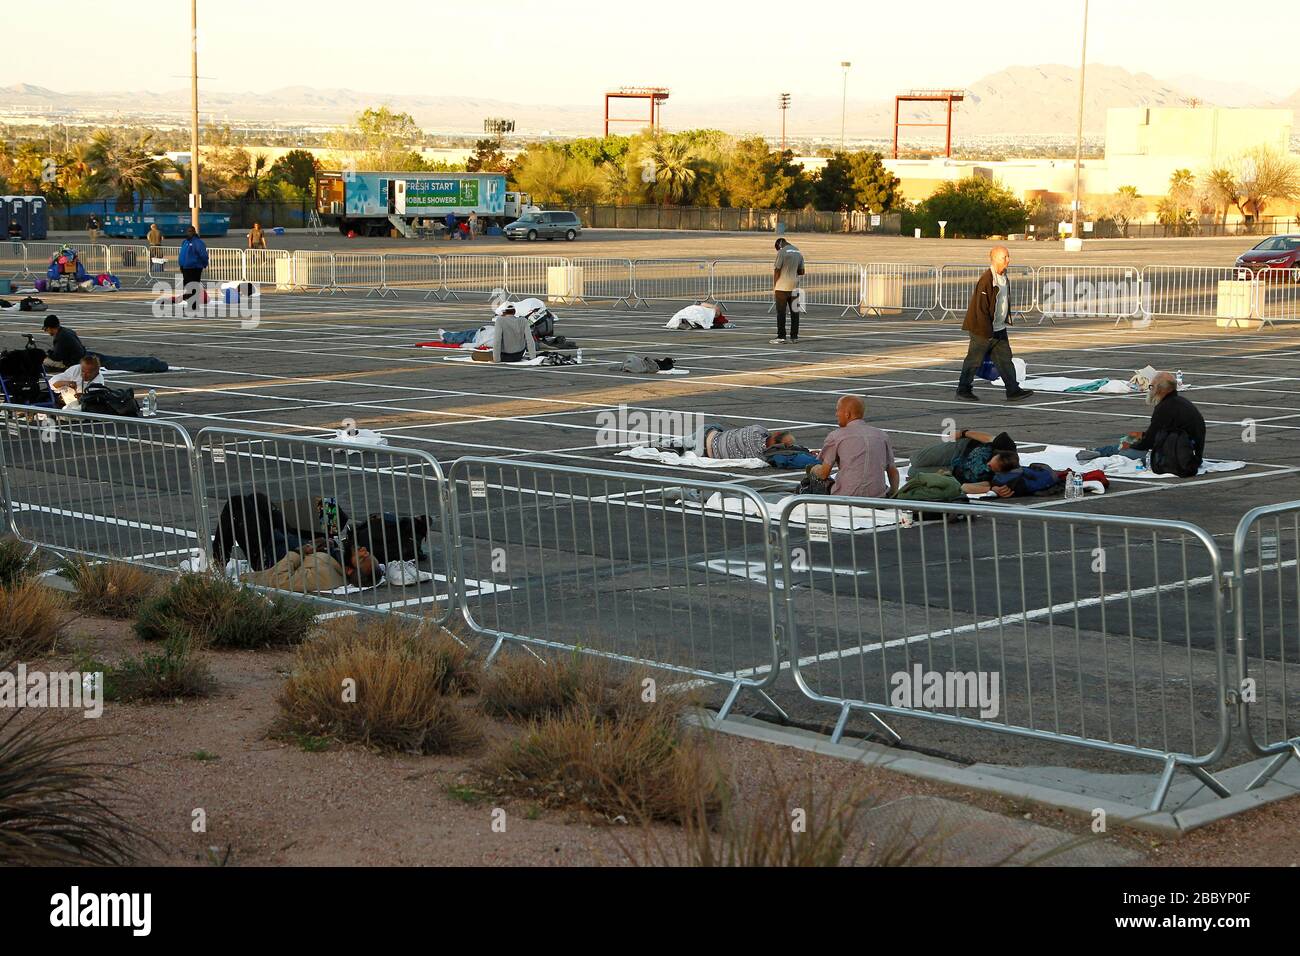 Las Vegas, United States. 1st Apr, 2020. Homeless individuals practice self-distancing measures at the Cashman Center parking lot during the Coronavirus closure in Las Vegas, Nevada on Wednesday, April 1, 2020. Photo by James Atoa/UPI Credit: UPI/Alamy Live News Stock Photo